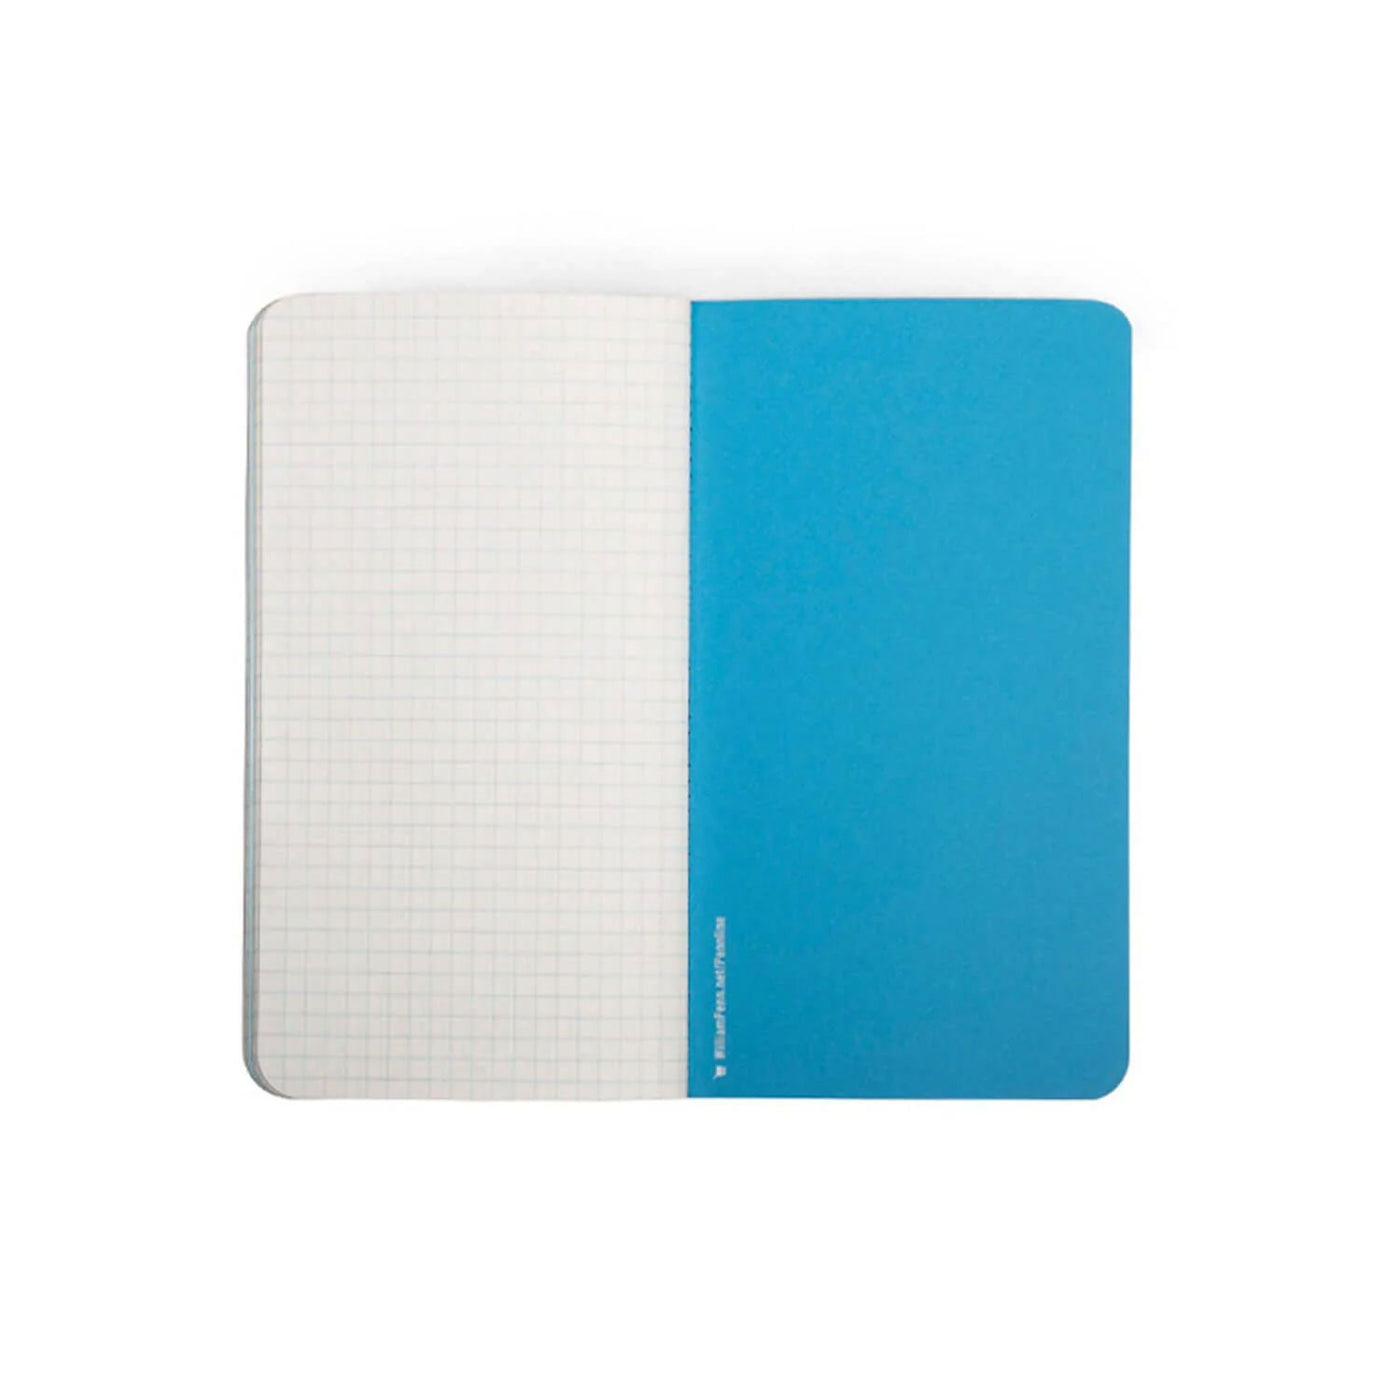 Pennline Quikfill Notebook Refill For Quikrite, Turquoise - Set Of 2 6